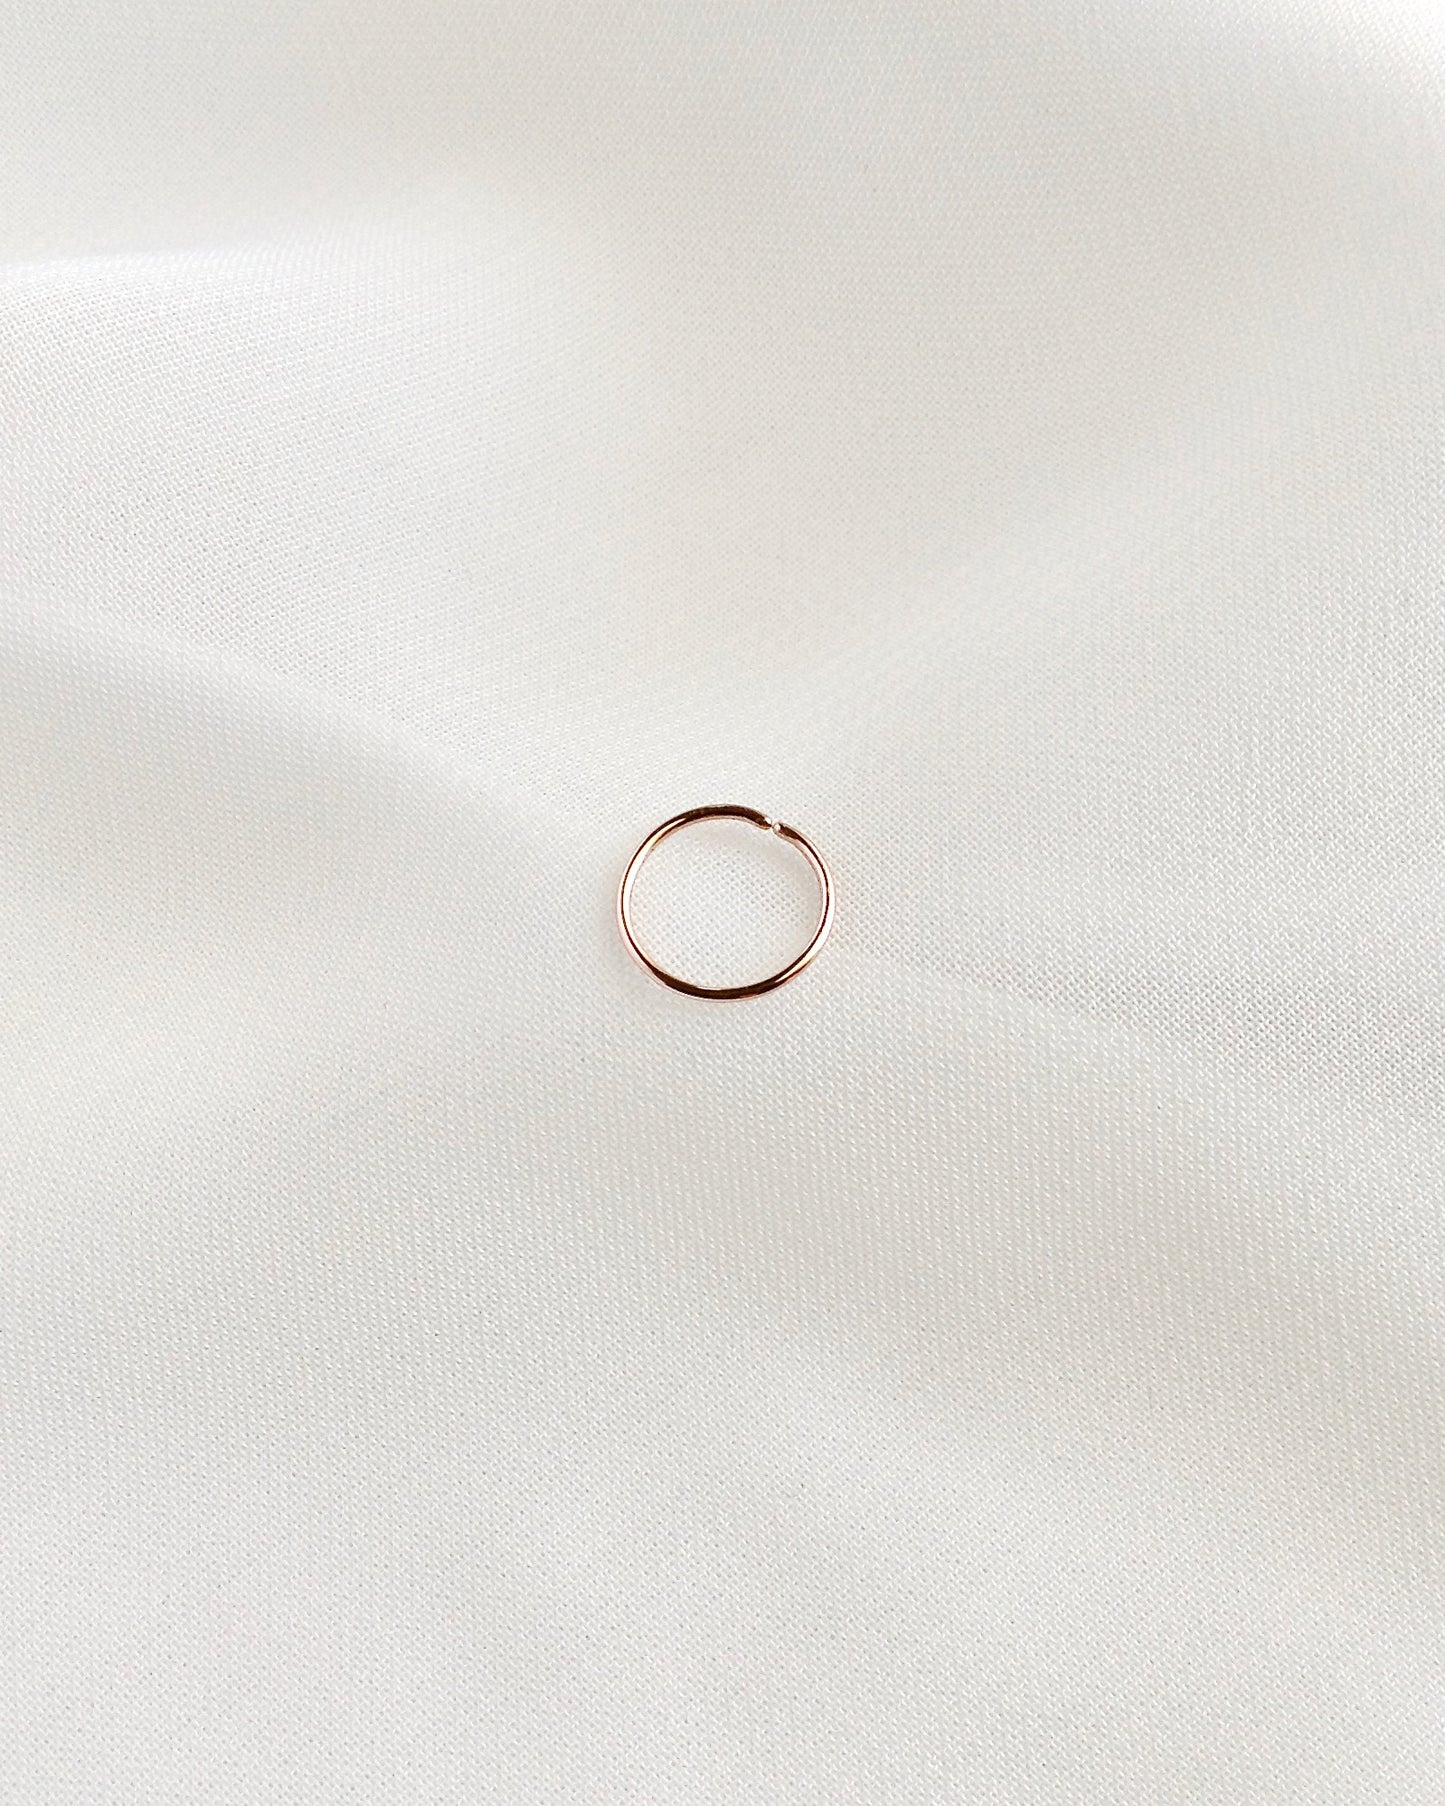 Rose Gold Filled Cartilage Hoop | Rose Gold Filled Helix Hoop | Simple Rose Gold Cartilage Hoop Earring | IB Jewelry